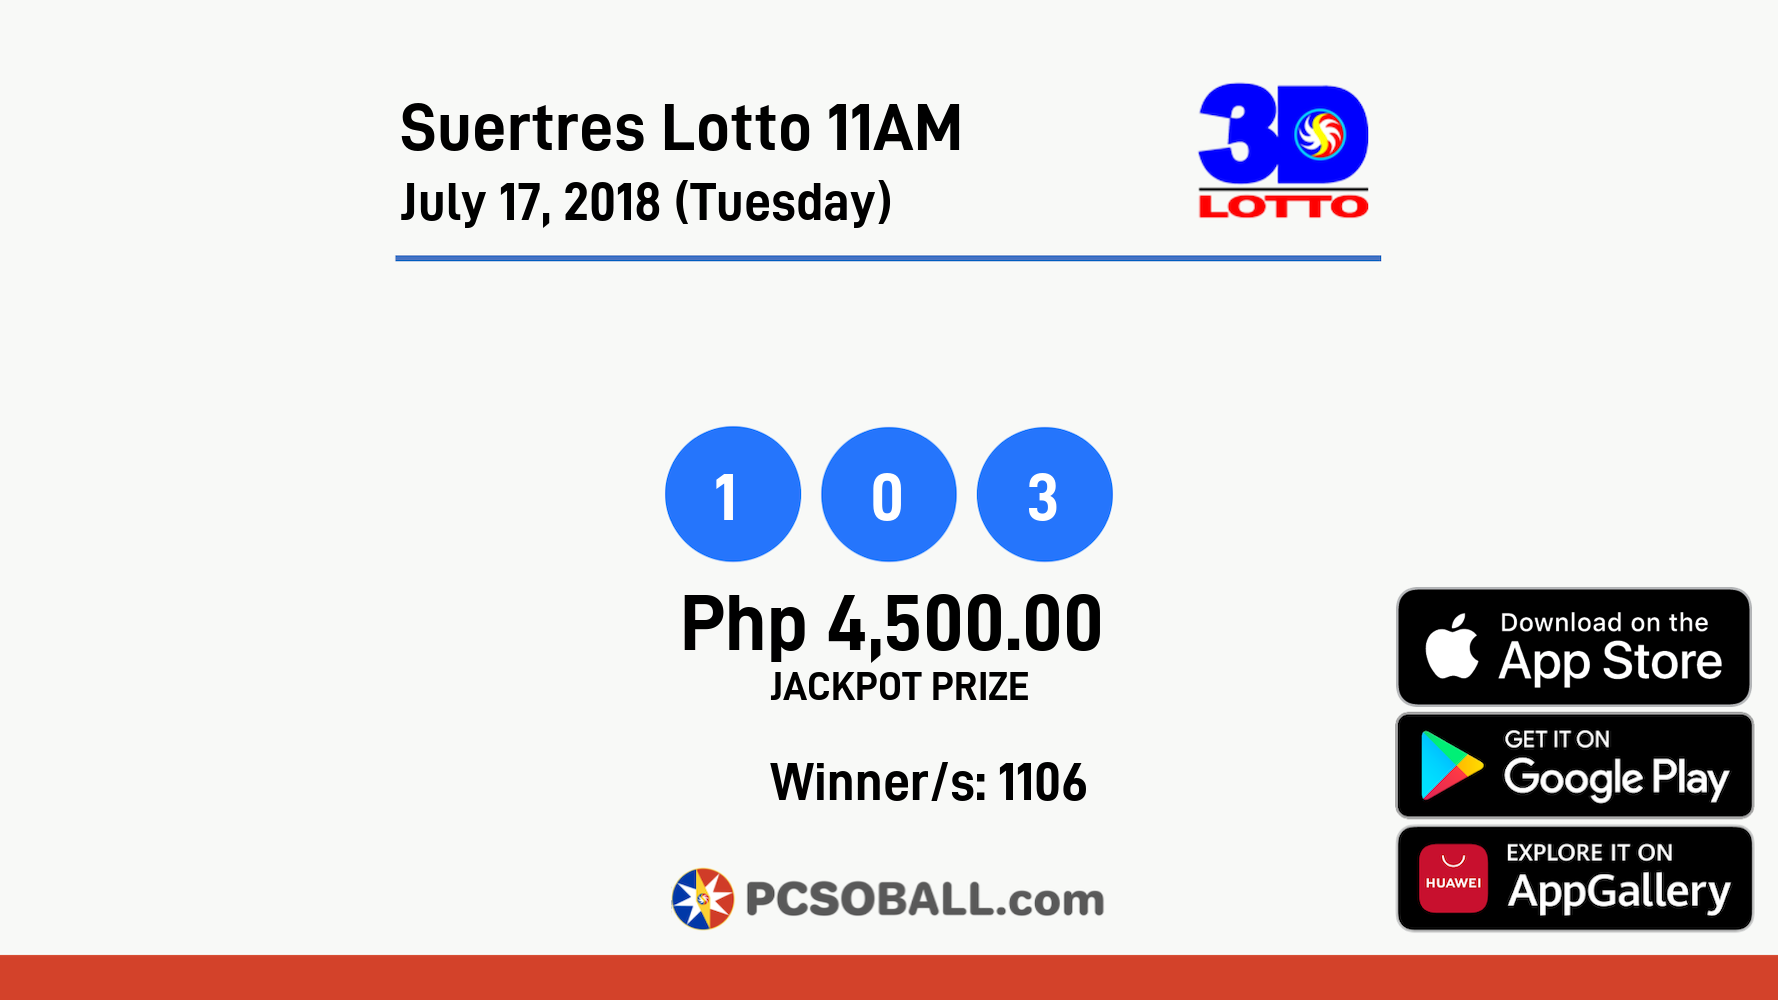 Suertres Lotto 11AM July 17, 2018 (Tuesday) Result